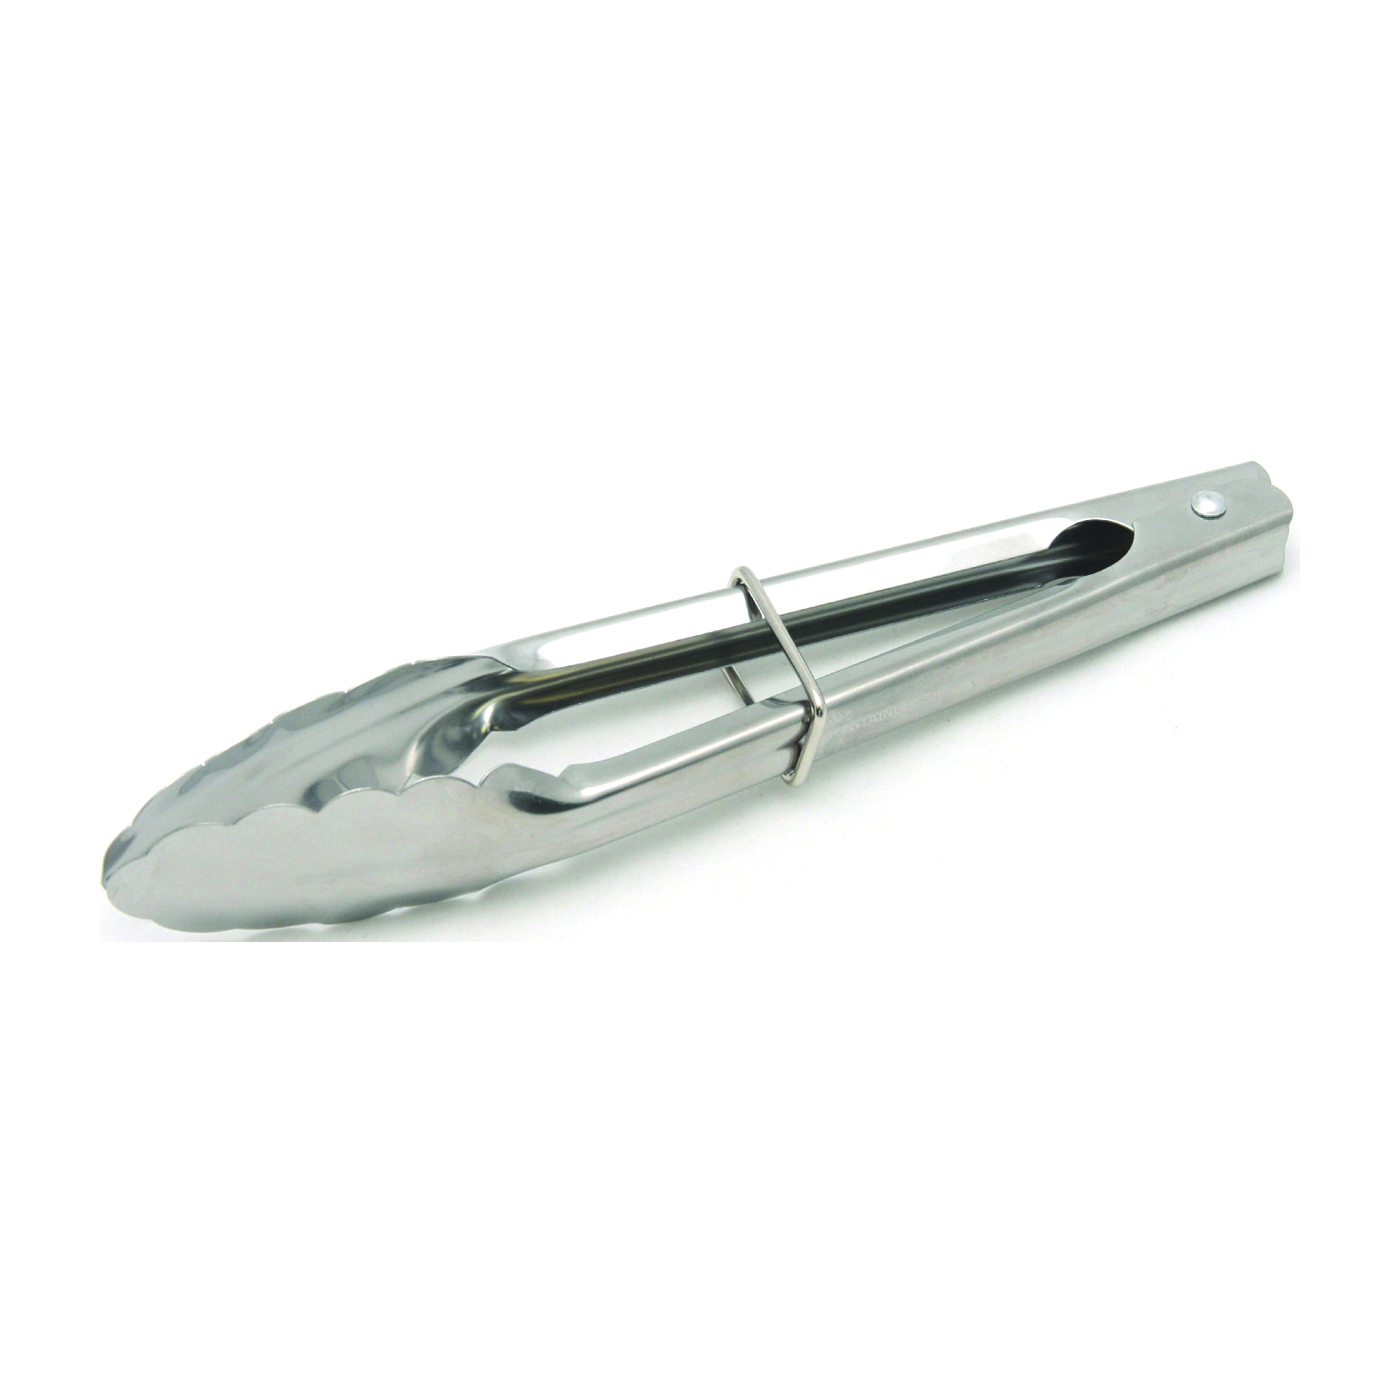 21451 Serving Tongs, 9 in L, Stainless Steel